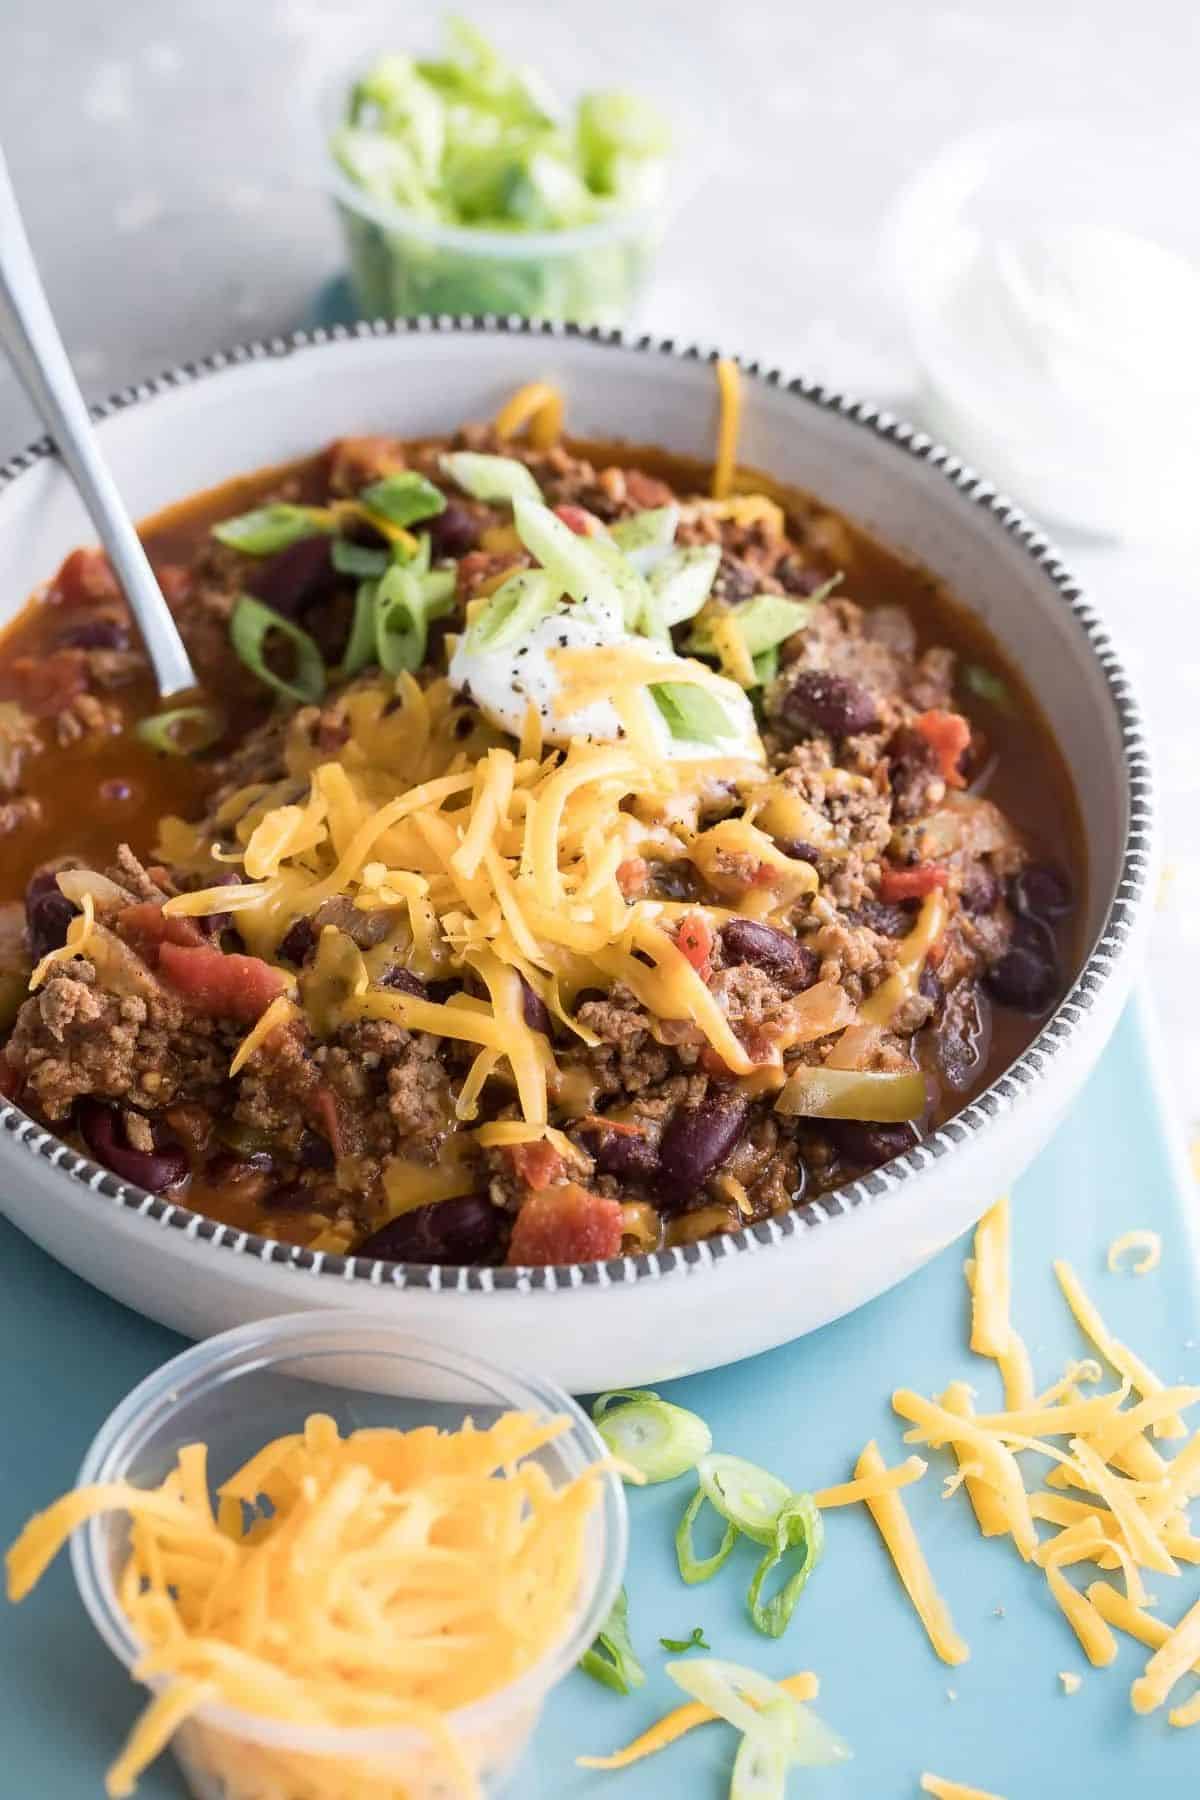 Tasteful venison chili in a bowl with a spoon.